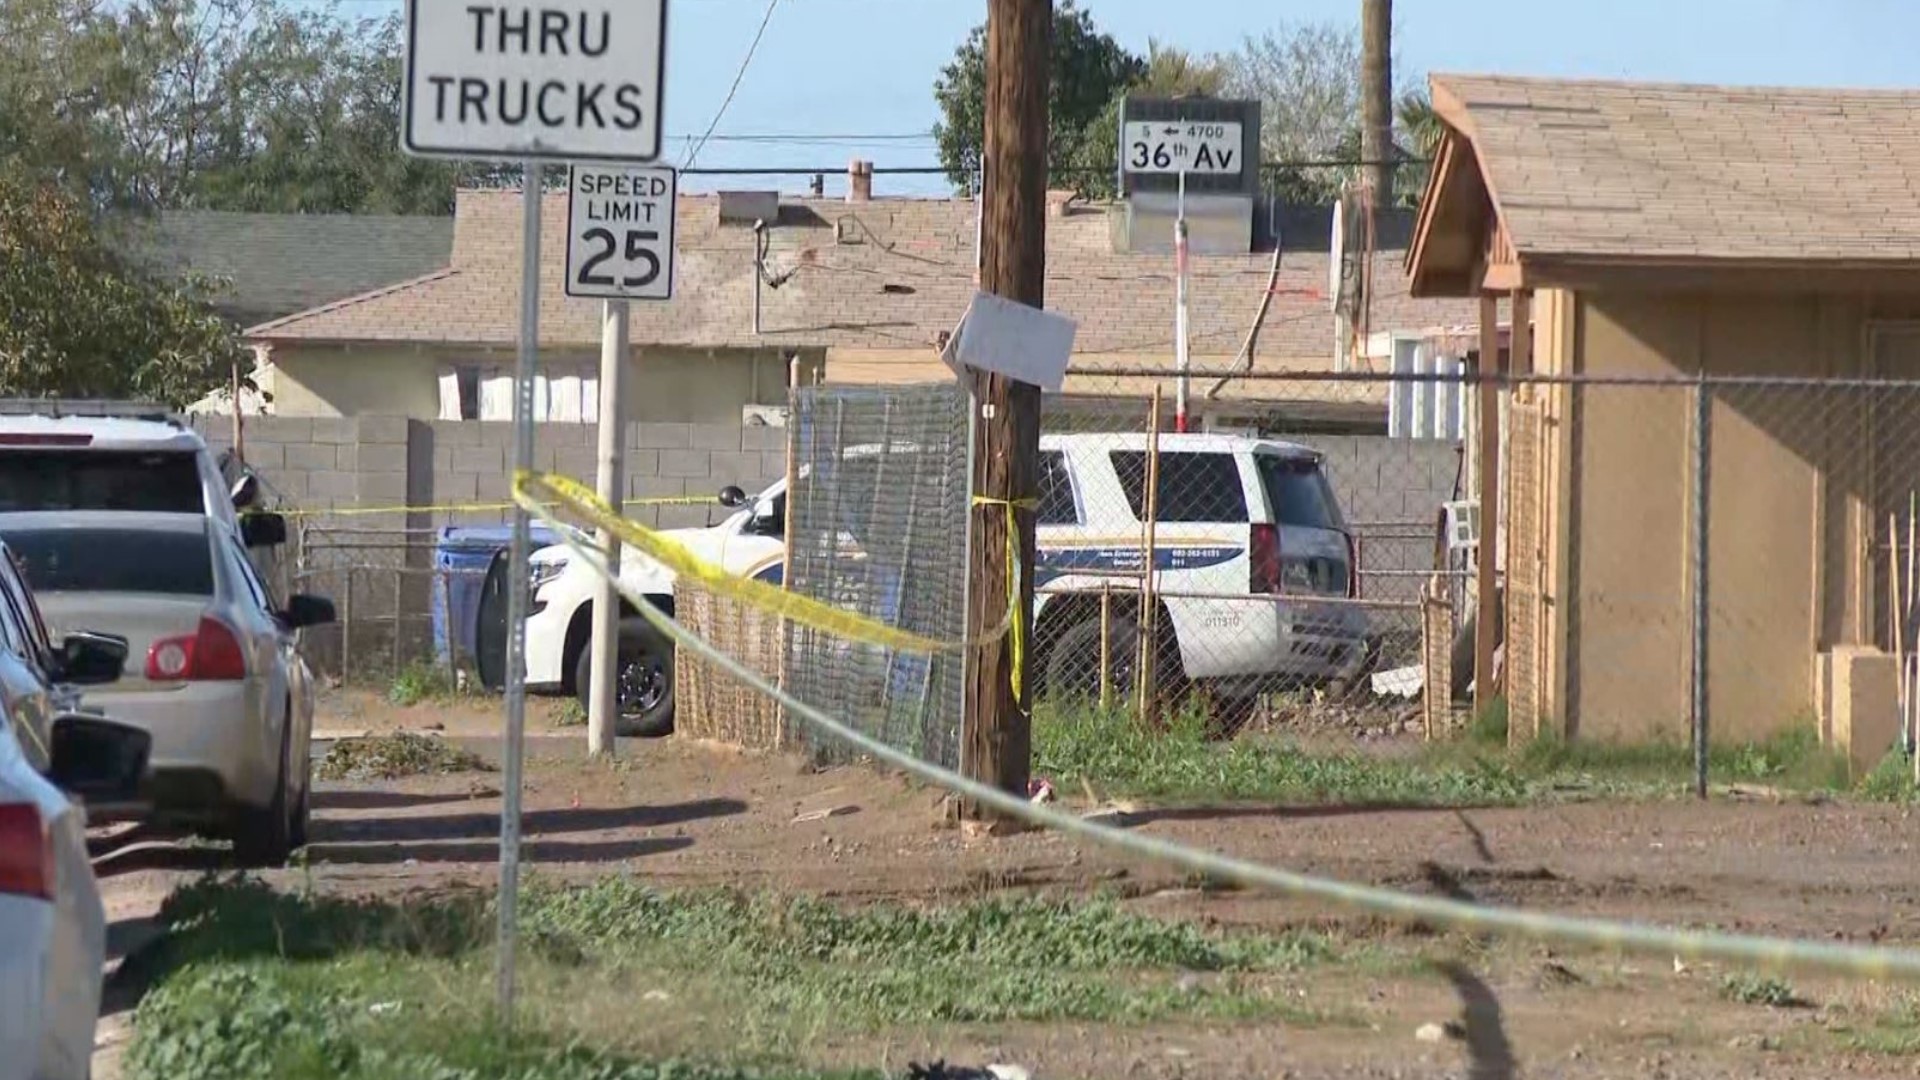 No officers were injured in Tuesday's shooting, according to the Phoenix Police Department